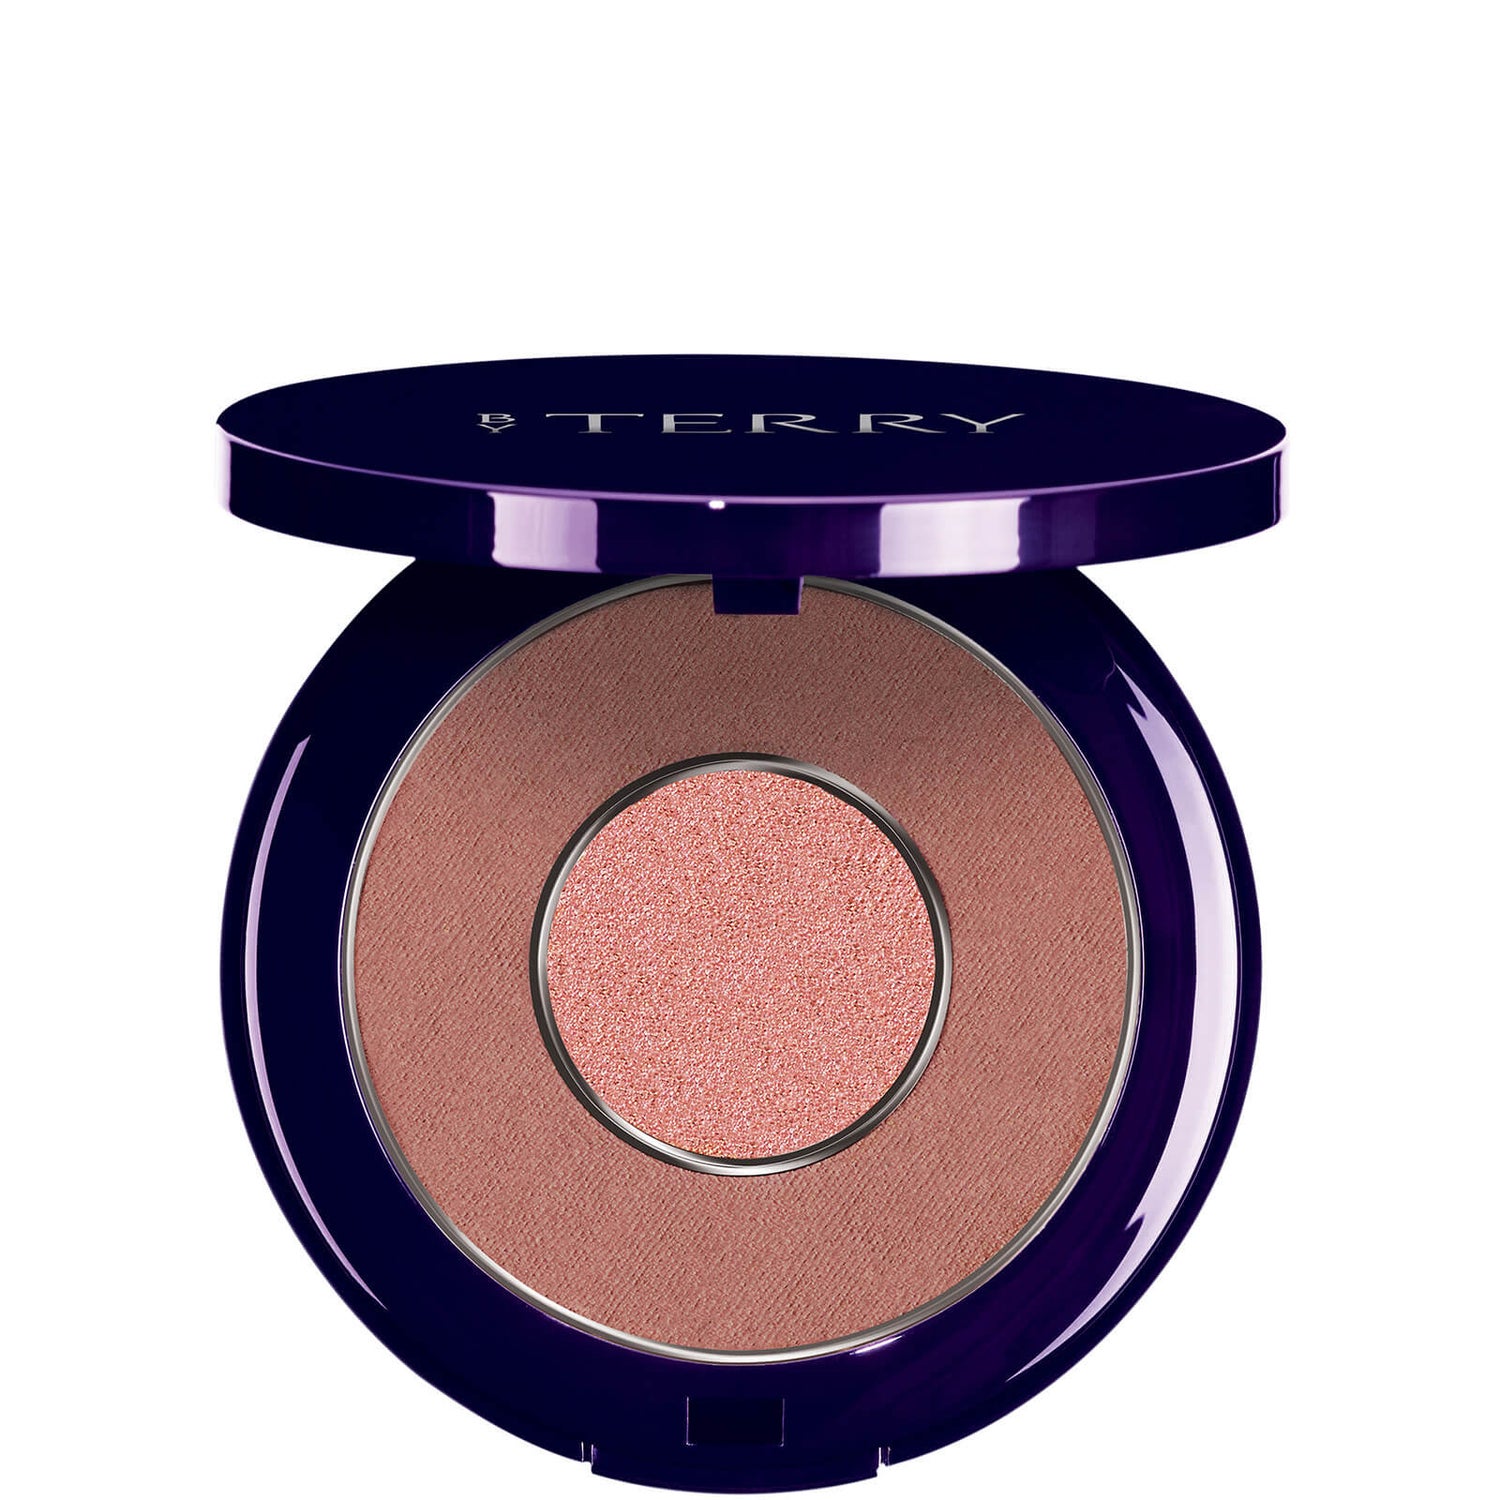 BY TERRY Mini Compact-Expert Dual Powder